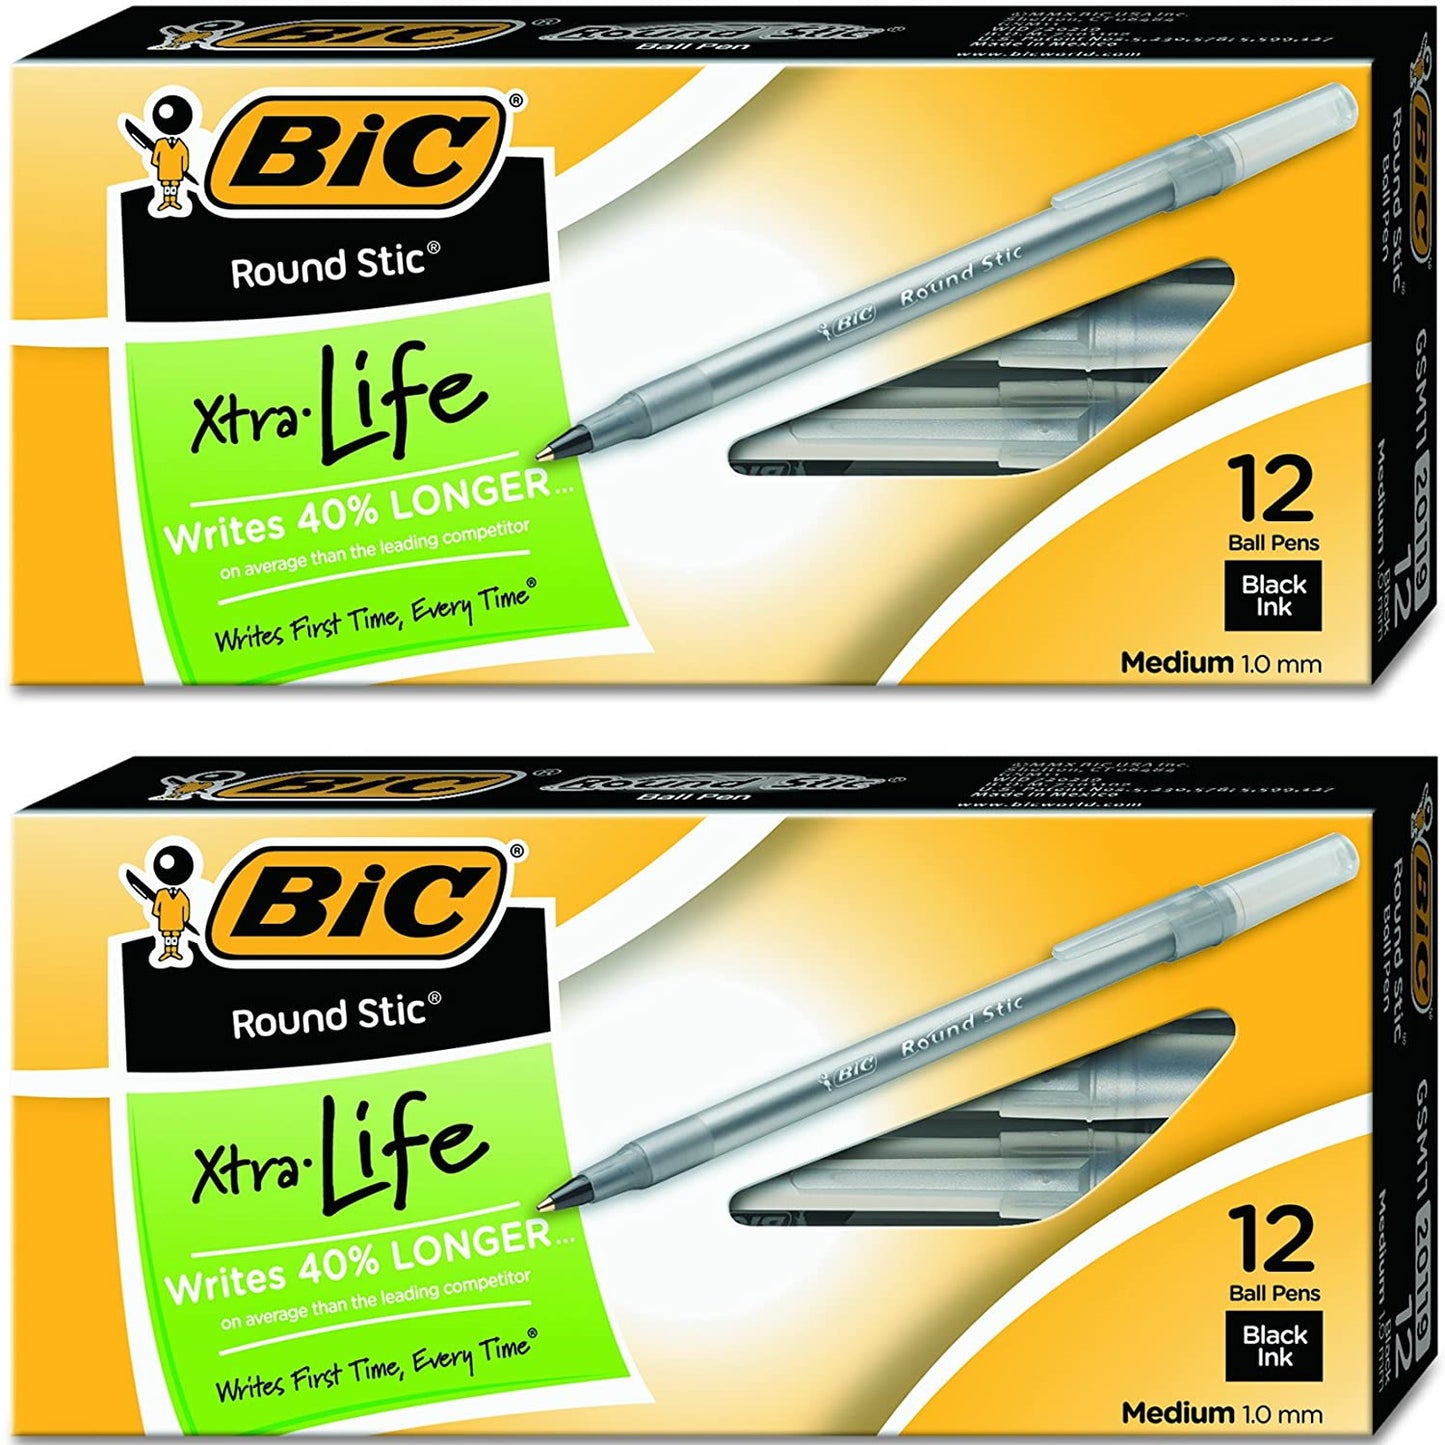 BIC Round Stic Xtra Life Ballpoint Pen, Medium Point (1.0mm), Black, 24-Count -Pack of 2